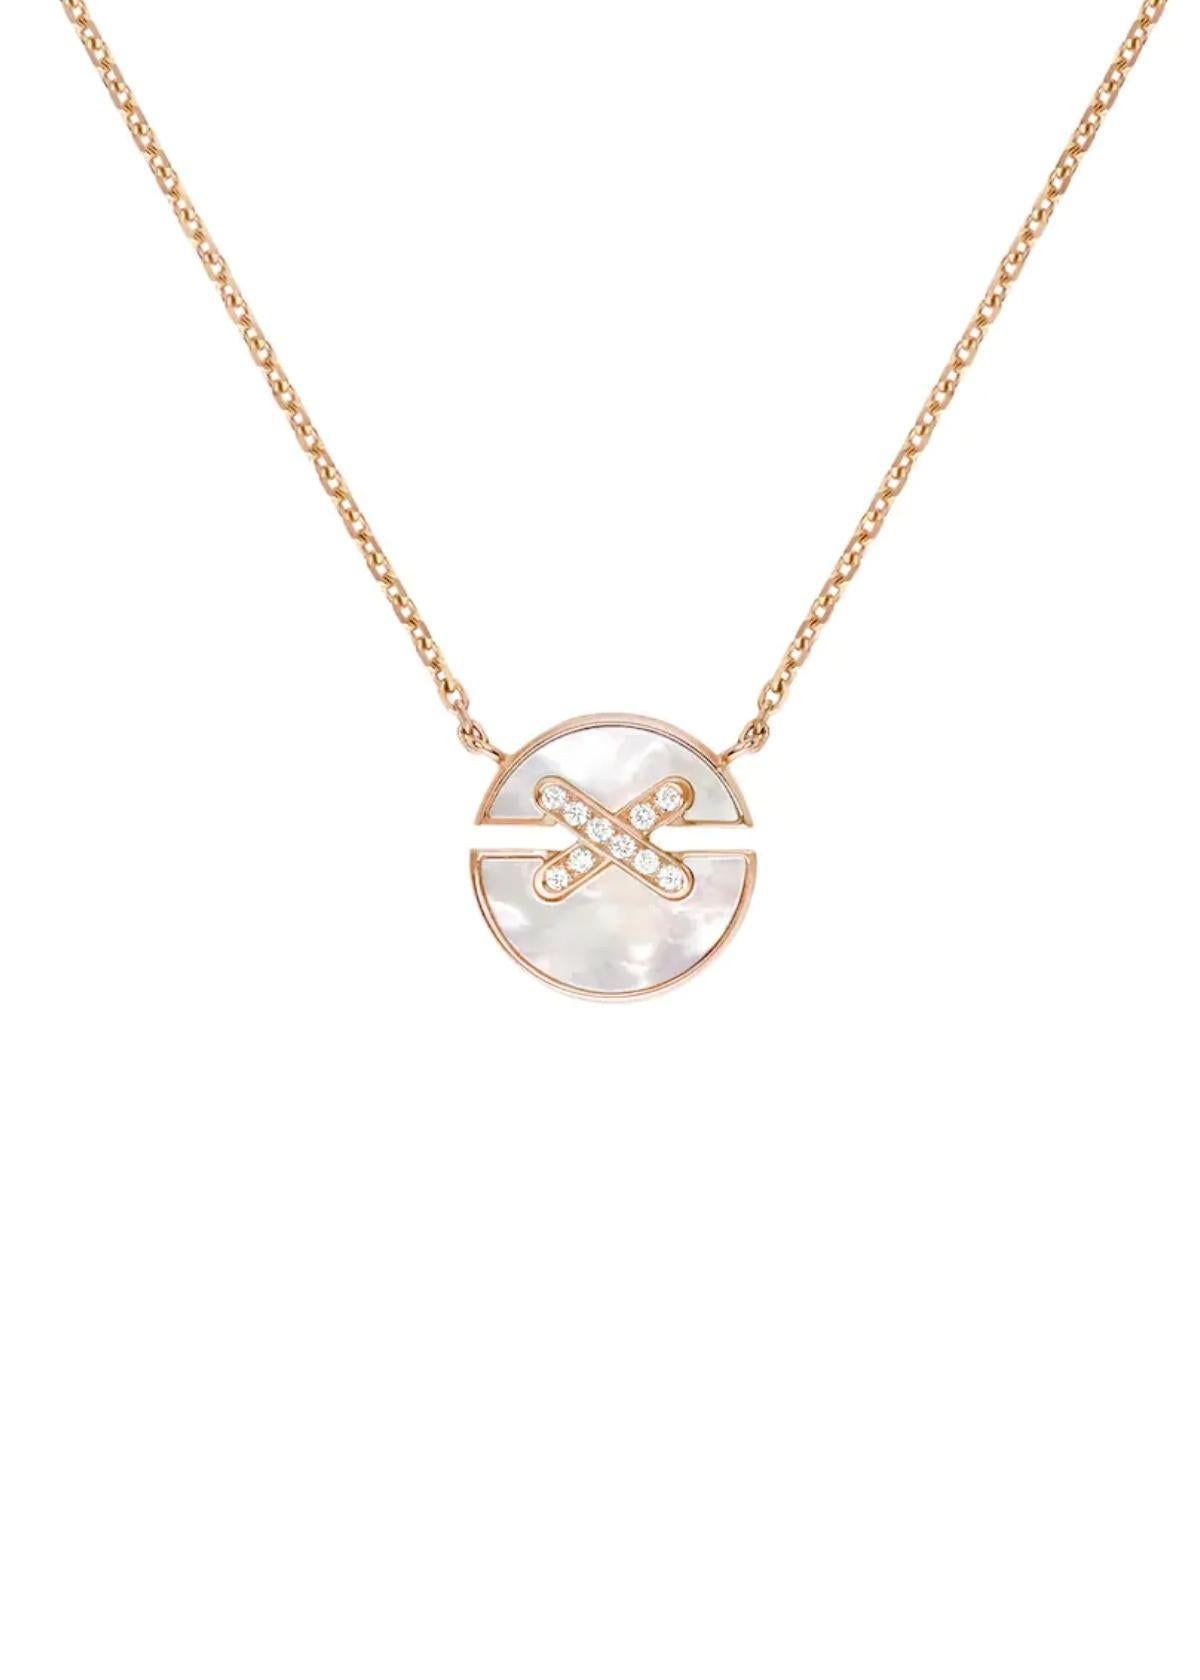 Jeux de Liens Harmony small model pendant in rose gold and mother-of-pearl, set with brilliant-cut diamonds.
A universal symbol of unity and perfection, the circle is an expression of eternity. In an asymmetrical spirit, Chaumet invents the Jeux de